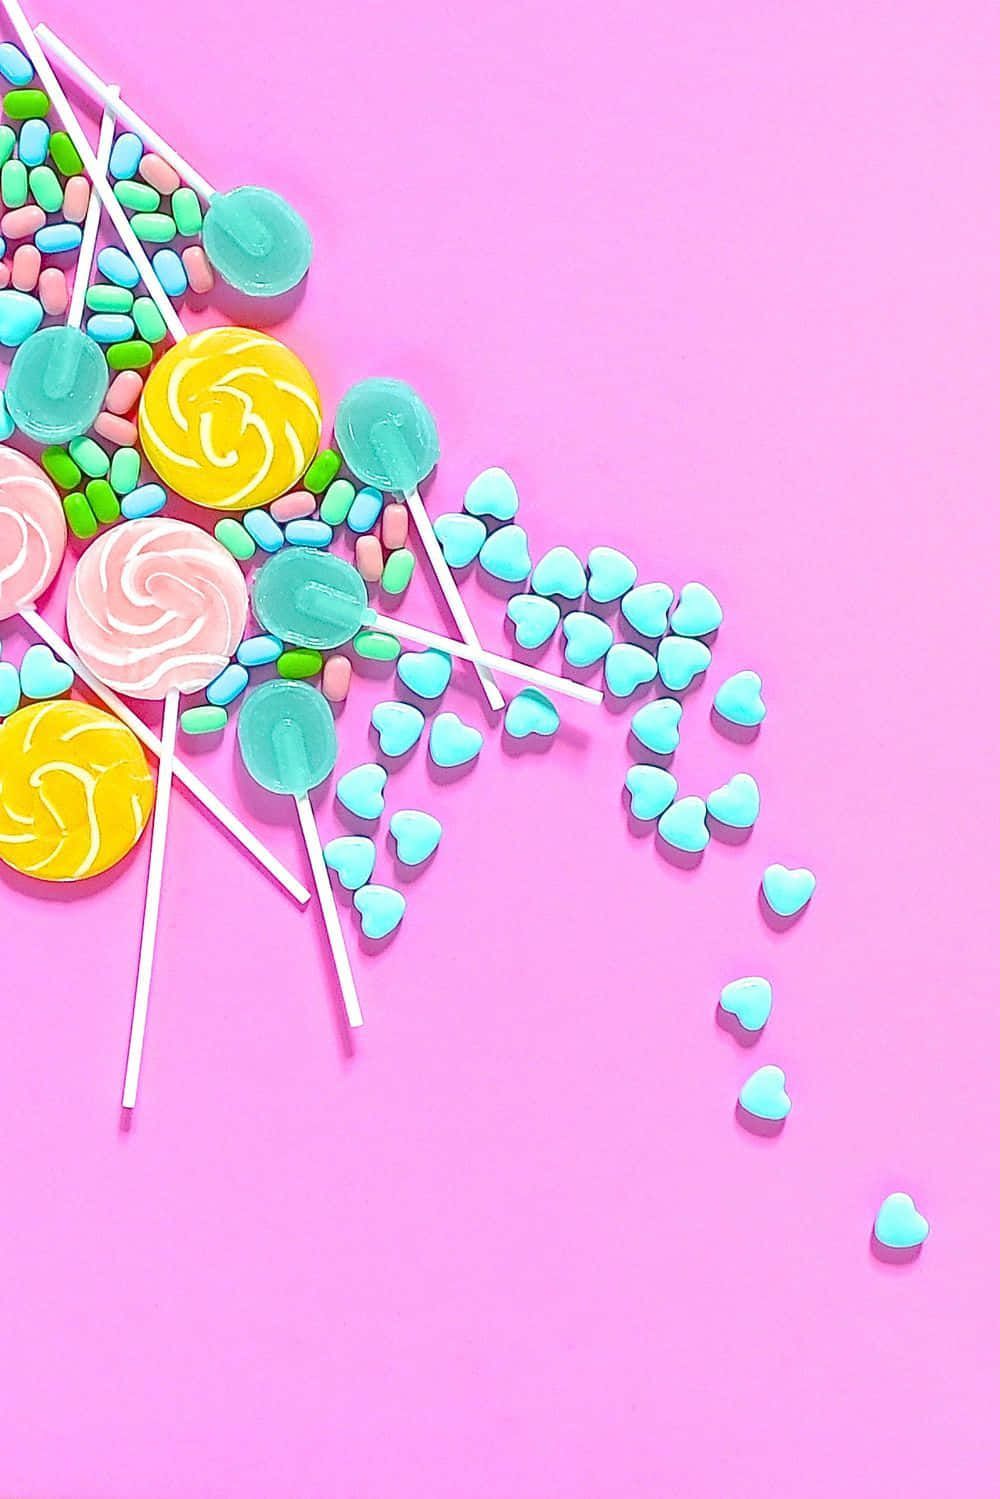 A flat lay of colorful candies on a pink background - Candy